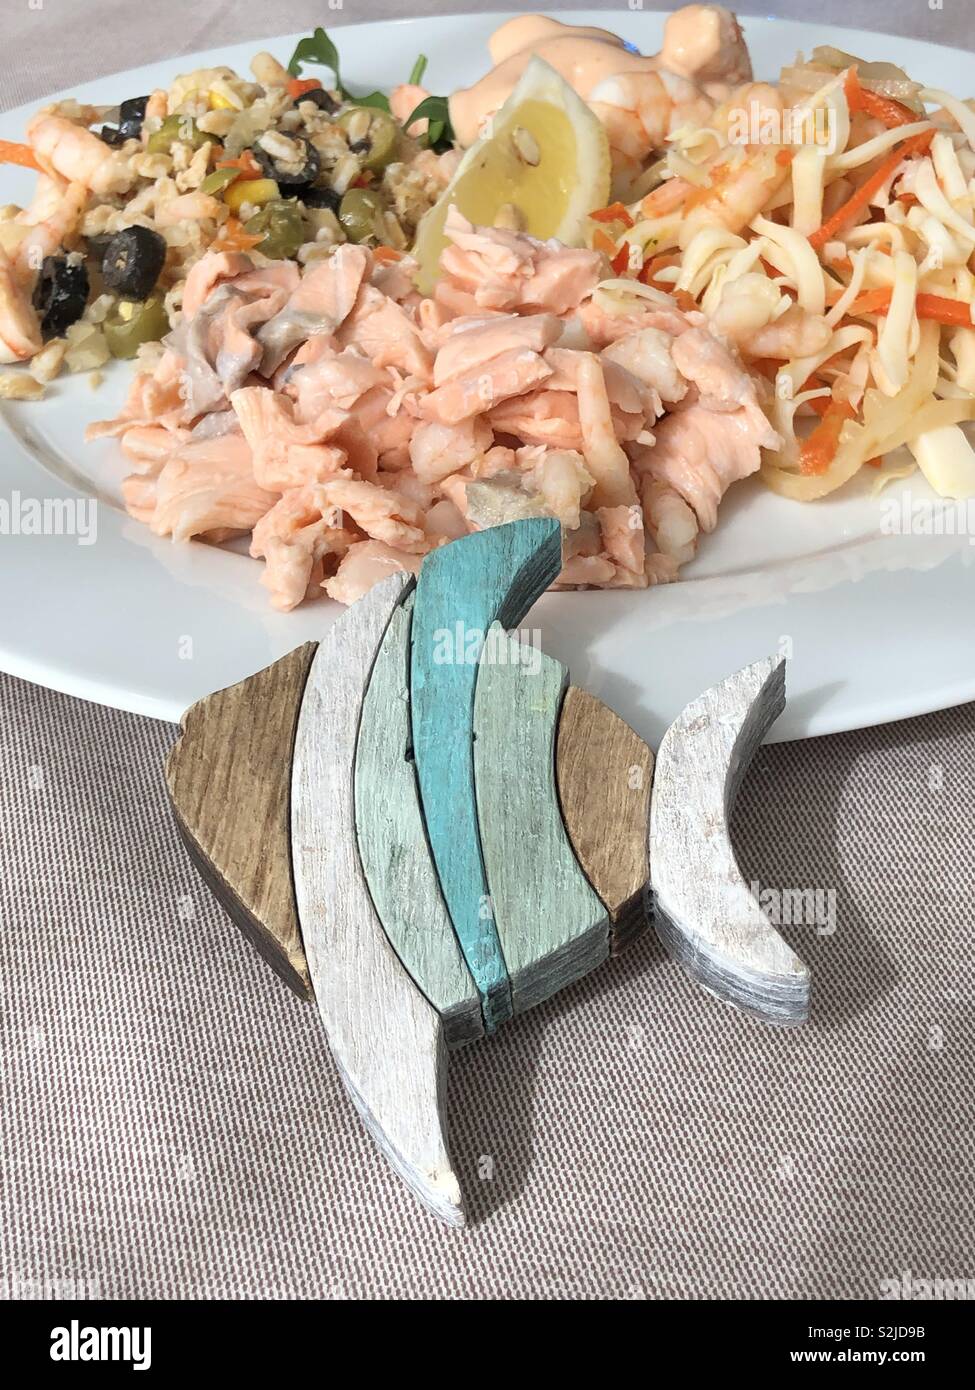 Seafood appetizers Stock Photo